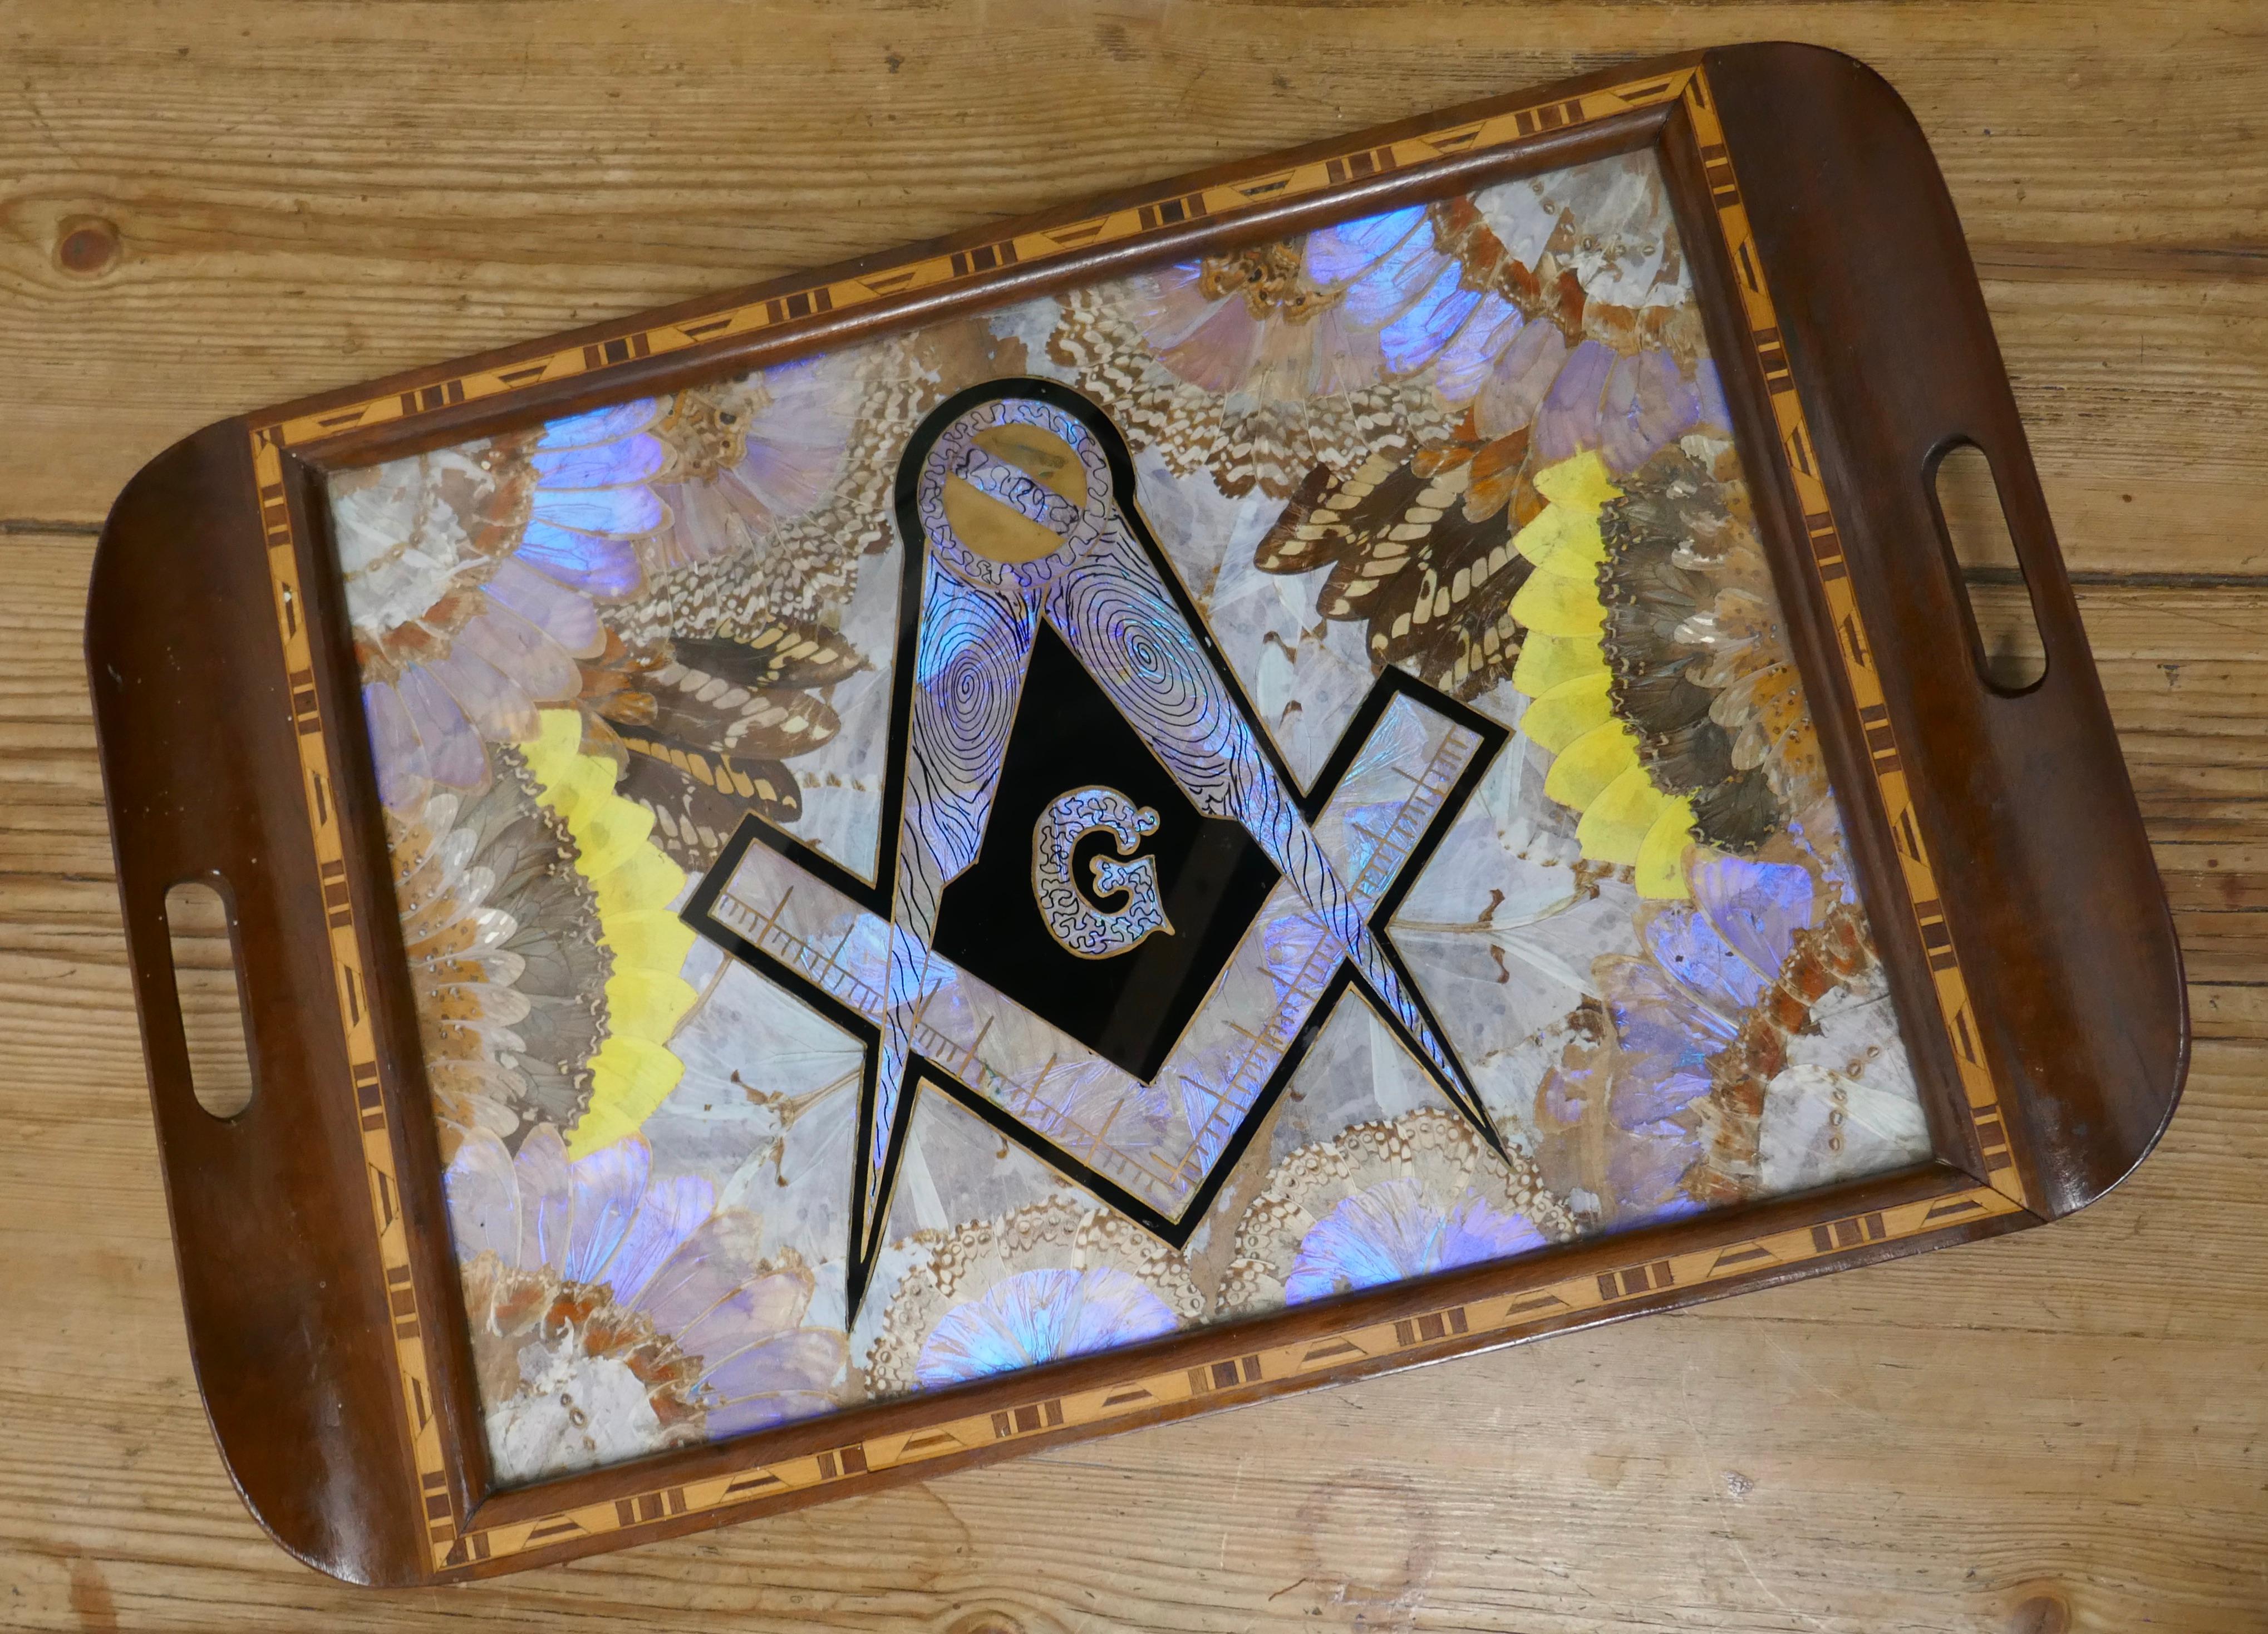 Masonic Tunbridge wear tray with butterfly wing decoration

A very impressive piece from the very early 20th century, with decorative Tunbridge wear border and colourful butterfly wings with a reverse painted Masonic emblem on the glass

The